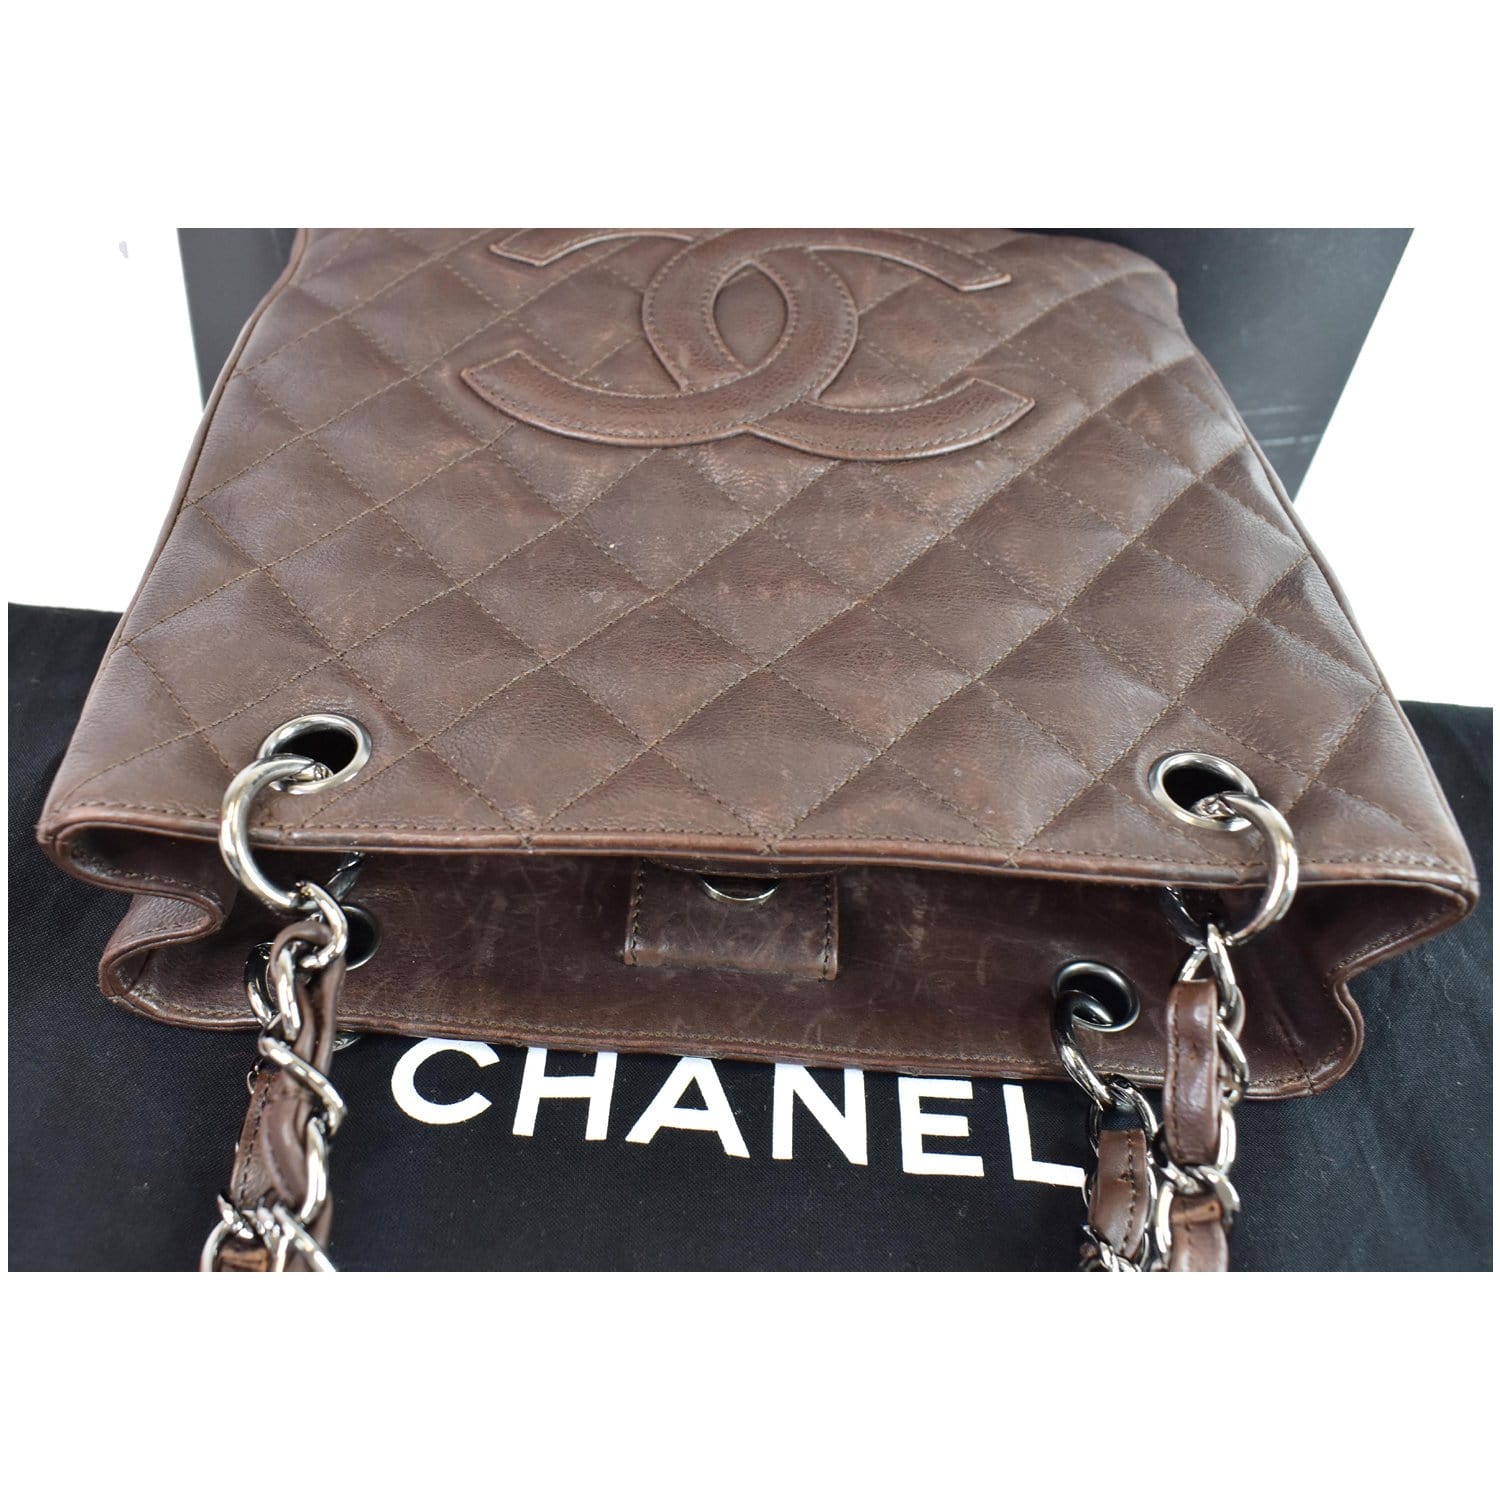 Chanel PST Caviar Leather Petit Shopping Tote Bag Brown